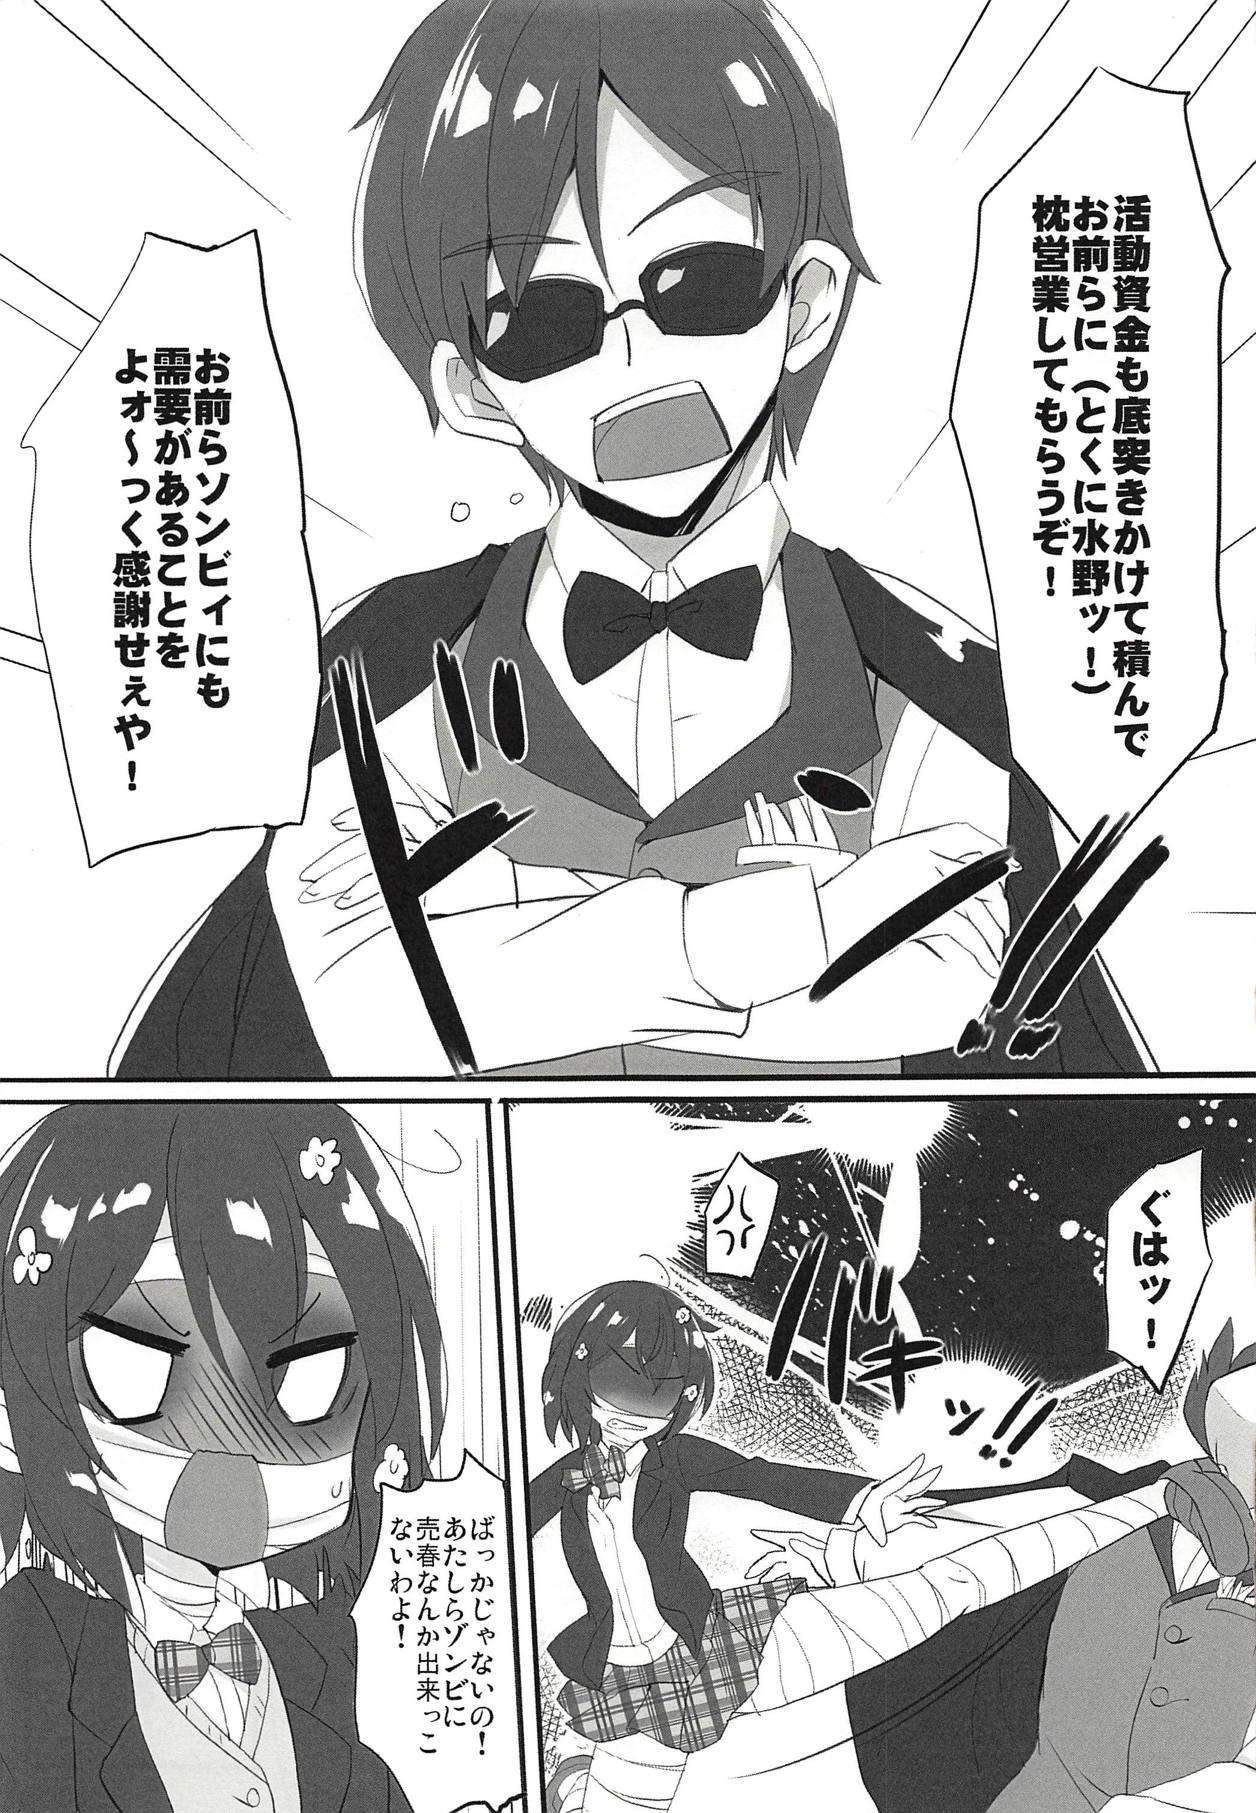 Toying GOOD and EVIL - Zombie land saga Shaking - Page 4